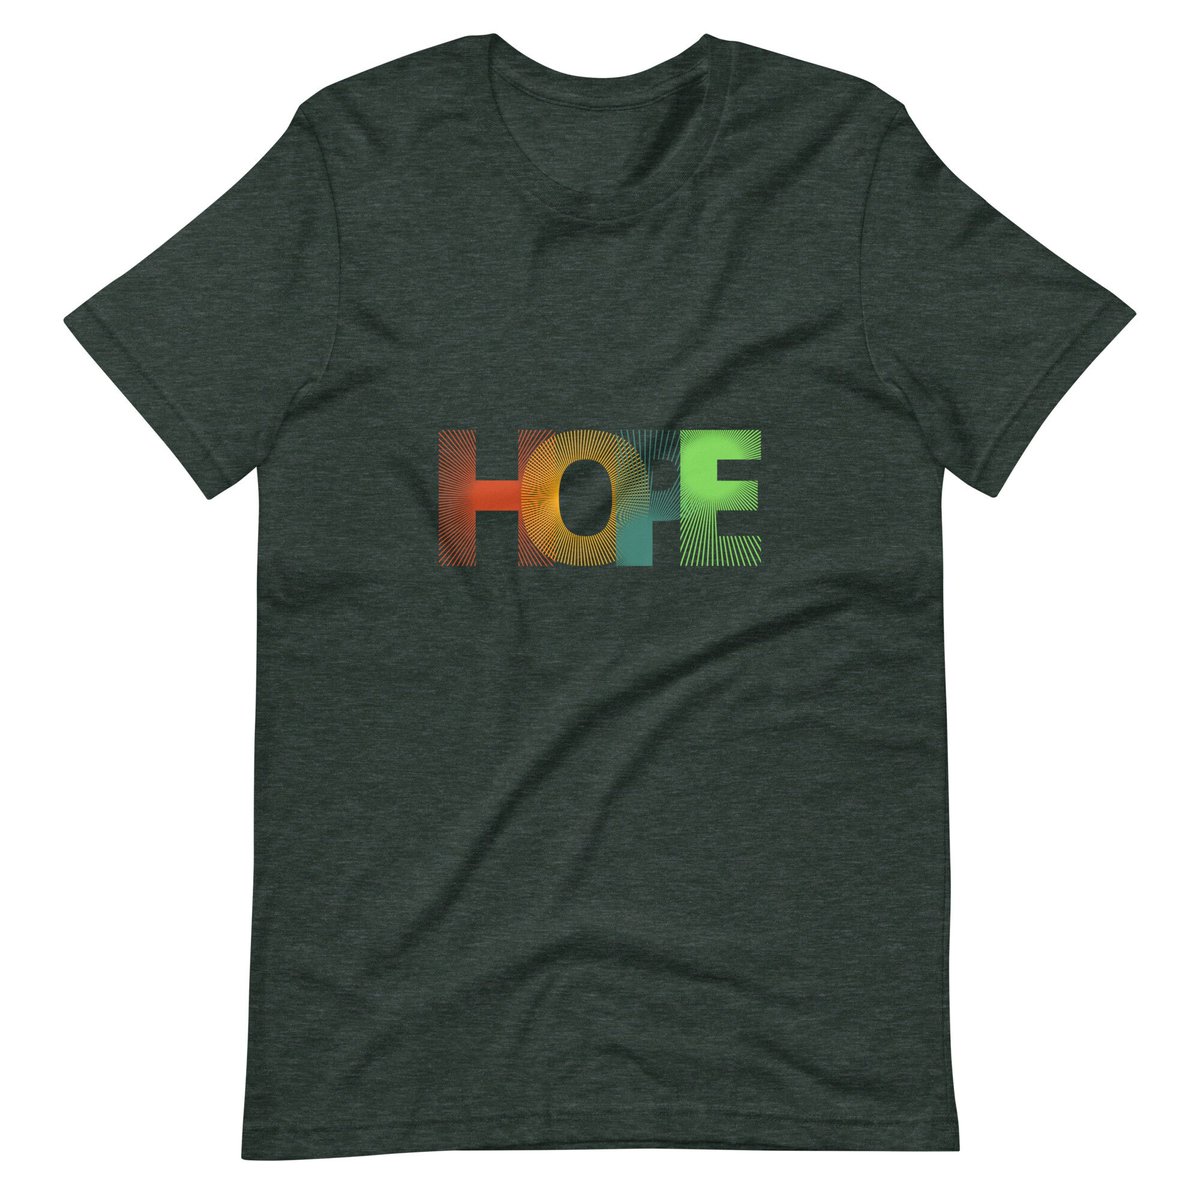 Hope Unisex t-shirt, summer t-shirt, spring t-shirt, gift for him, gift for her, Birthday, Easter, Mother's Day, Father's Day tuppu.net/dbe45079 #HandmadeGifts #MothersDay #FourthofJuly #GiftsforMom #MemorialDay #Etsy #FathersDay #SpringTshirt